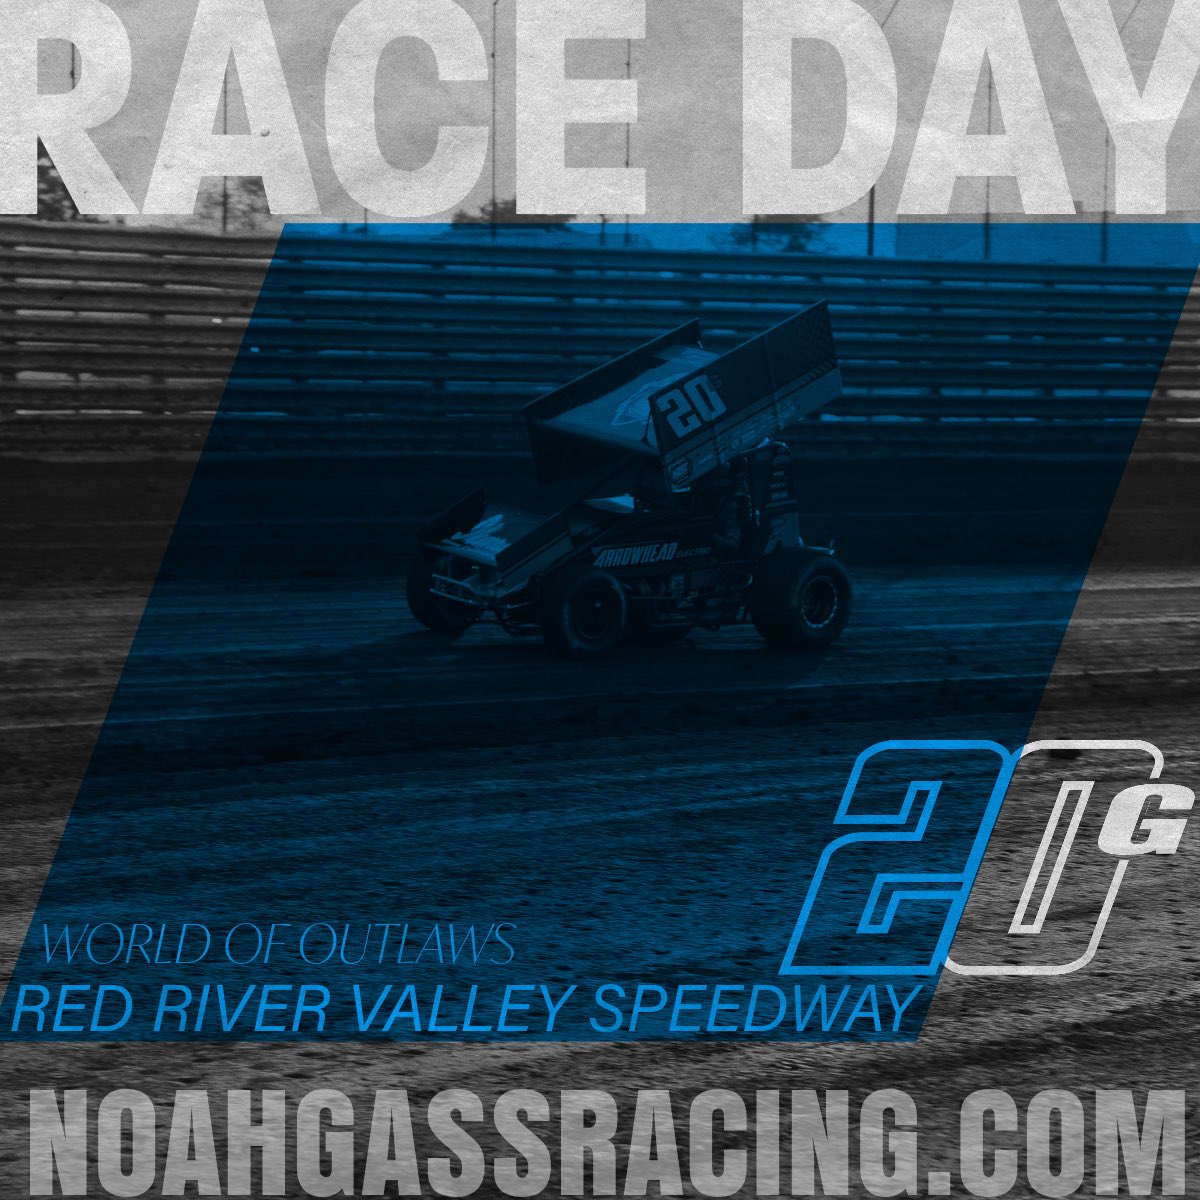 𝙍𝘼𝘾𝙀 𝘿𝘼𝙔 

It’s our final night of racing in North Dakota and we will be at @RRVSpeedway in Fargo for the Gerdau Duel in the Dakotas with the @WorldofOutlaws! 

Watch all the action 𝘓𝘐𝘝𝘌 on @dirtvision or follow on @MyRacePass!